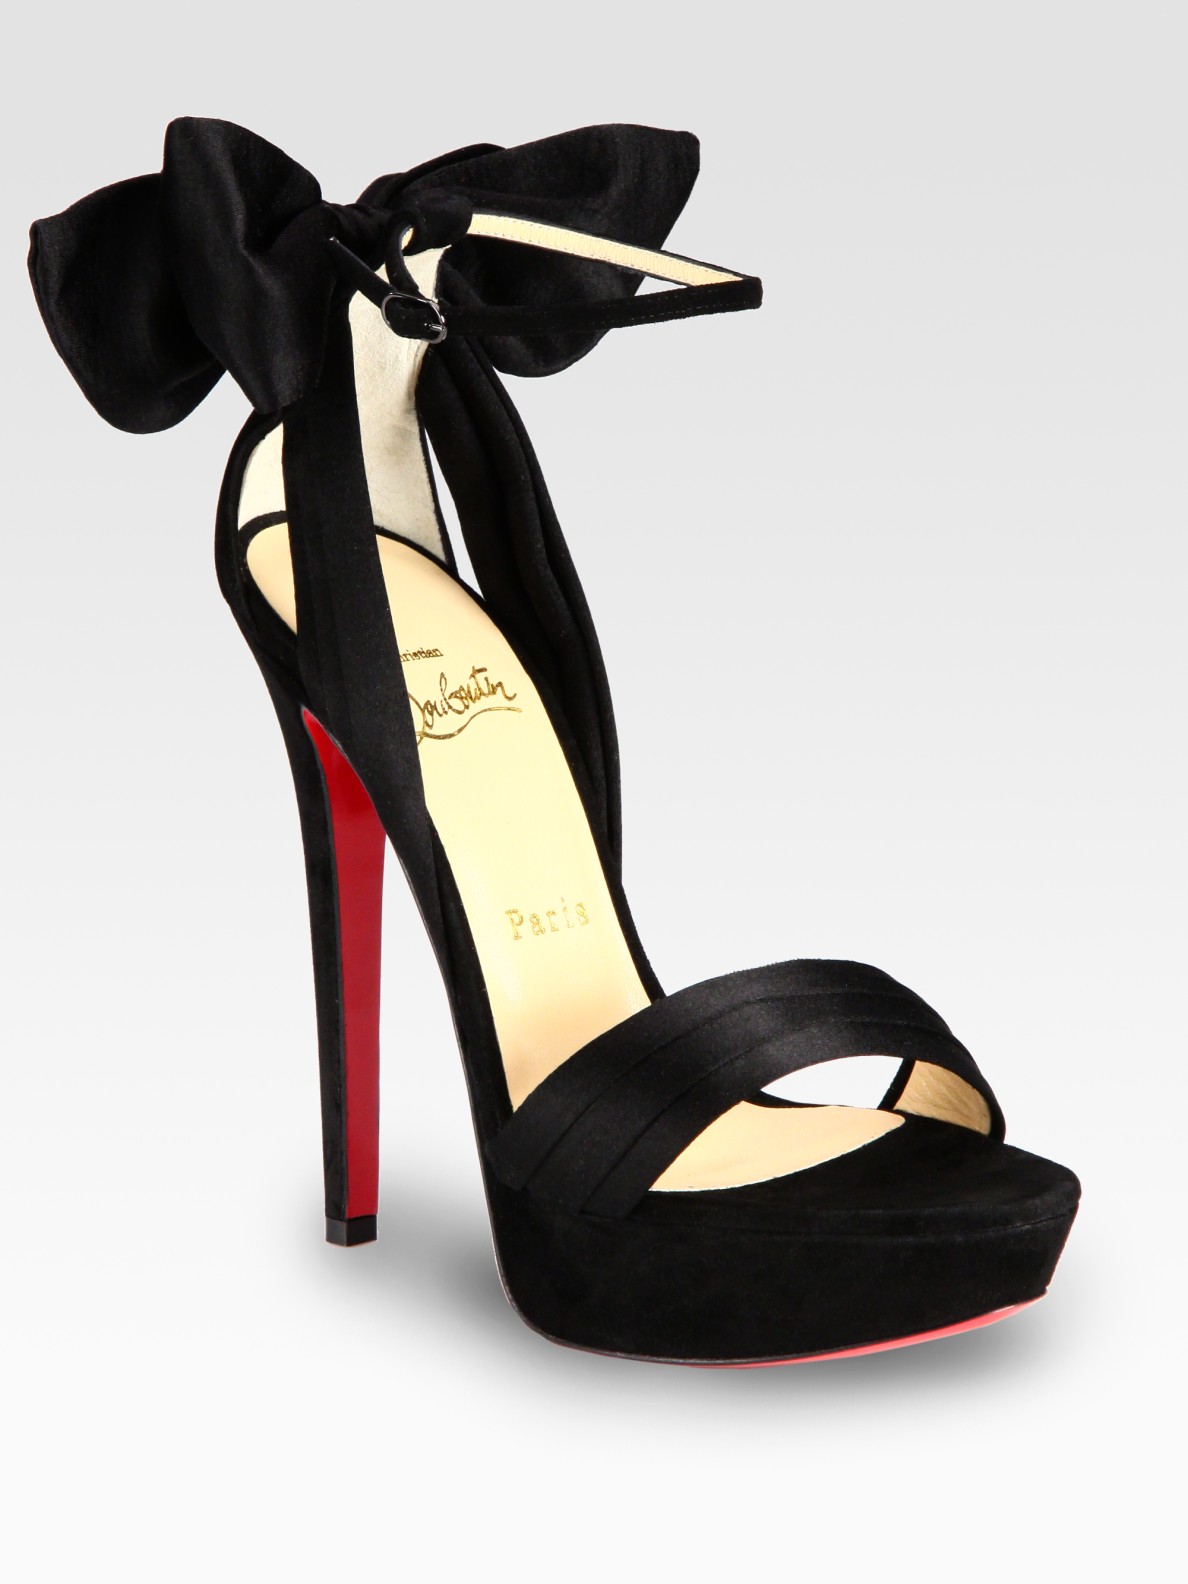 christian louboutin heels with bow